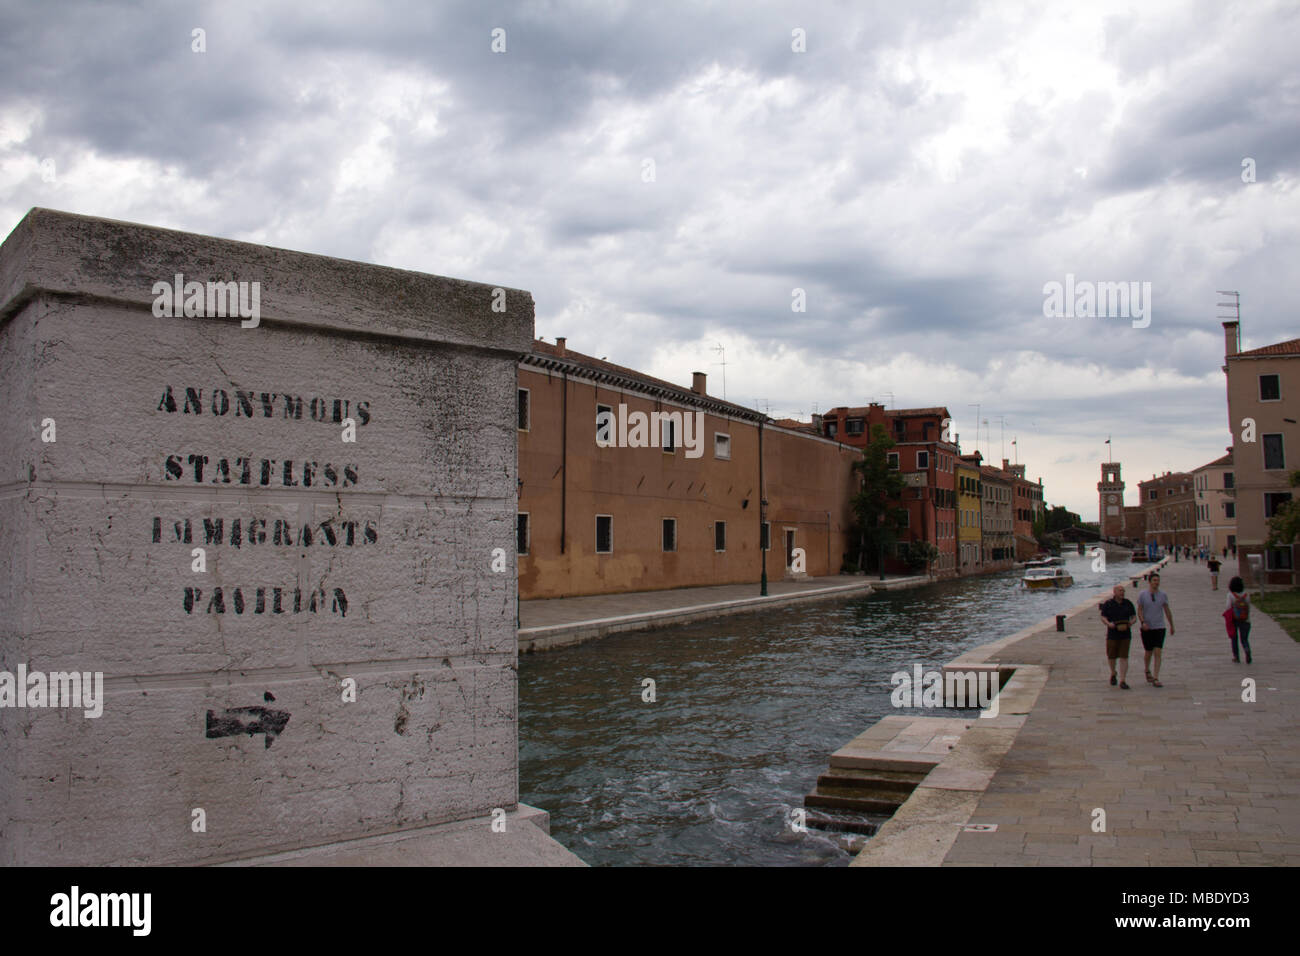 anonymous stateless immigrants pavilion graffiti in Venice, Italy Stock Photo